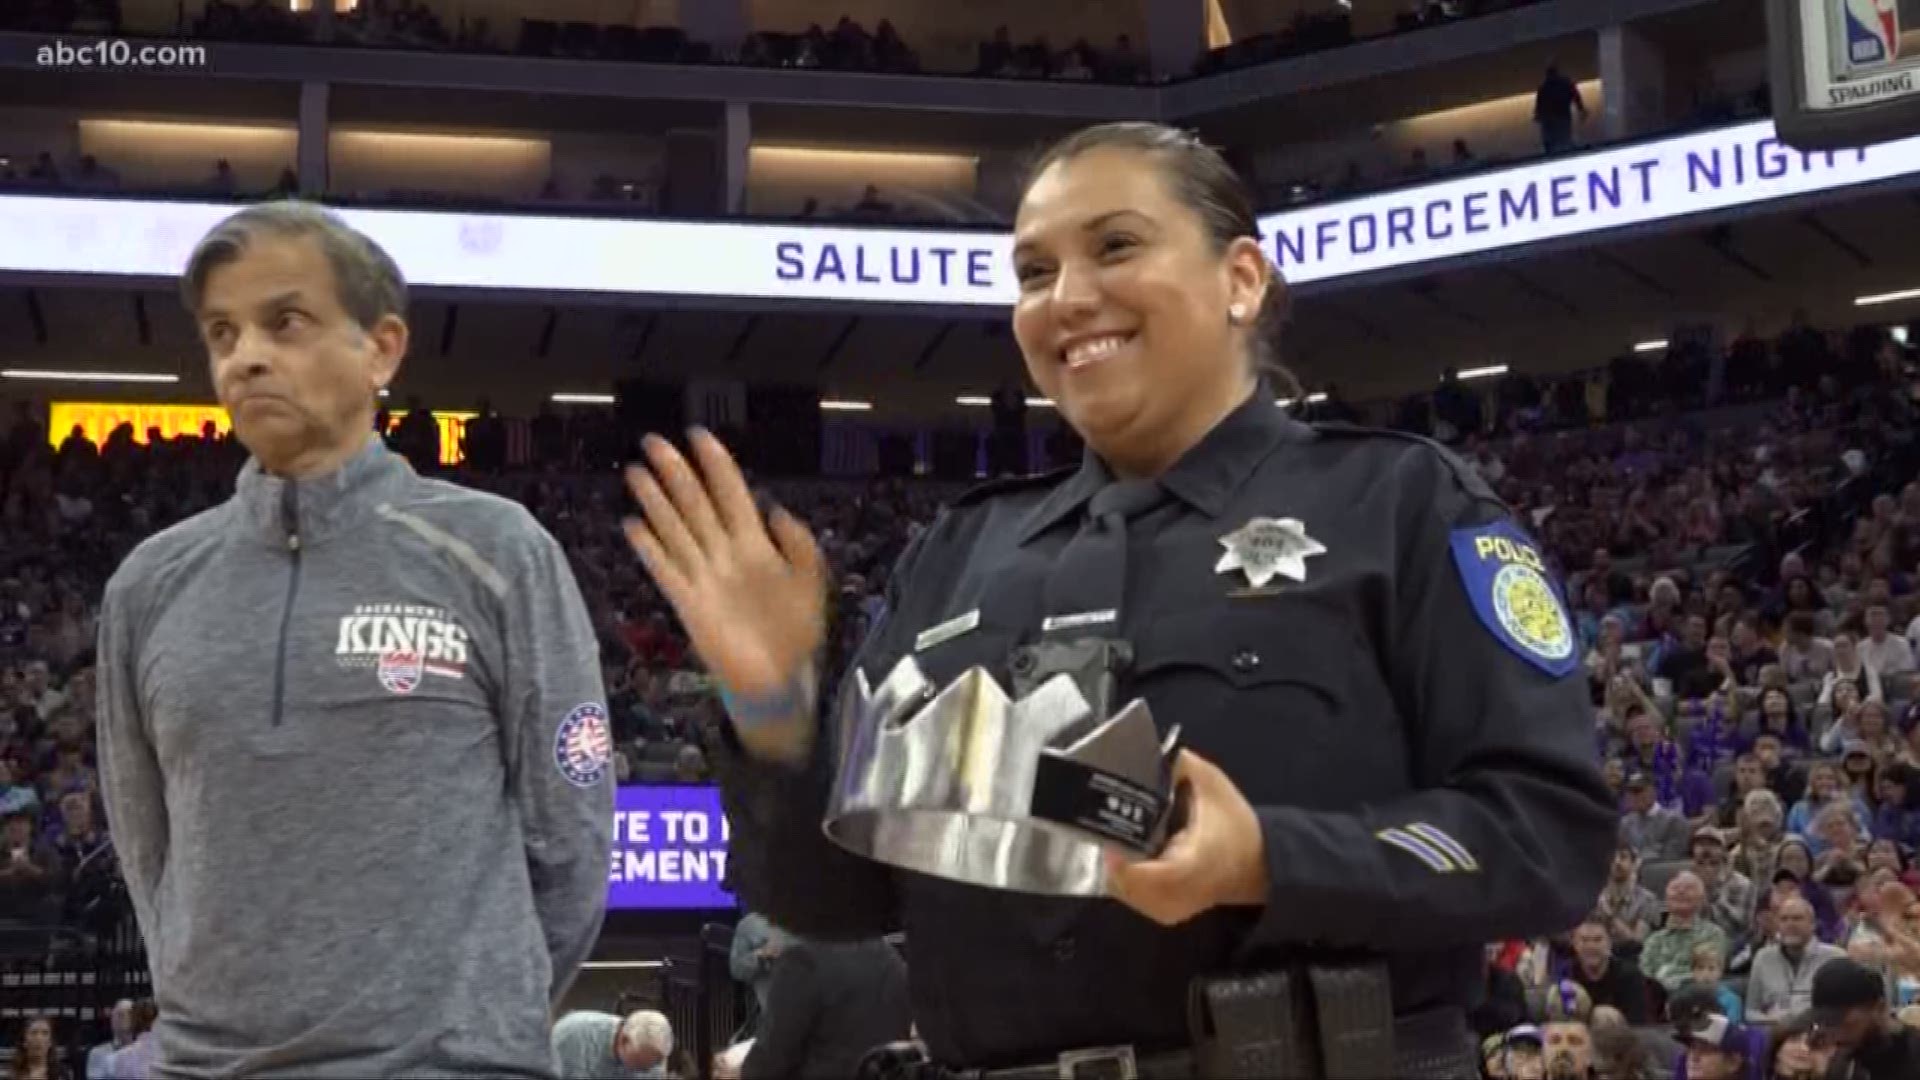 Lilia Vasquez was honored at the Golden 1 Center on Salute to Law Enforcement Night.